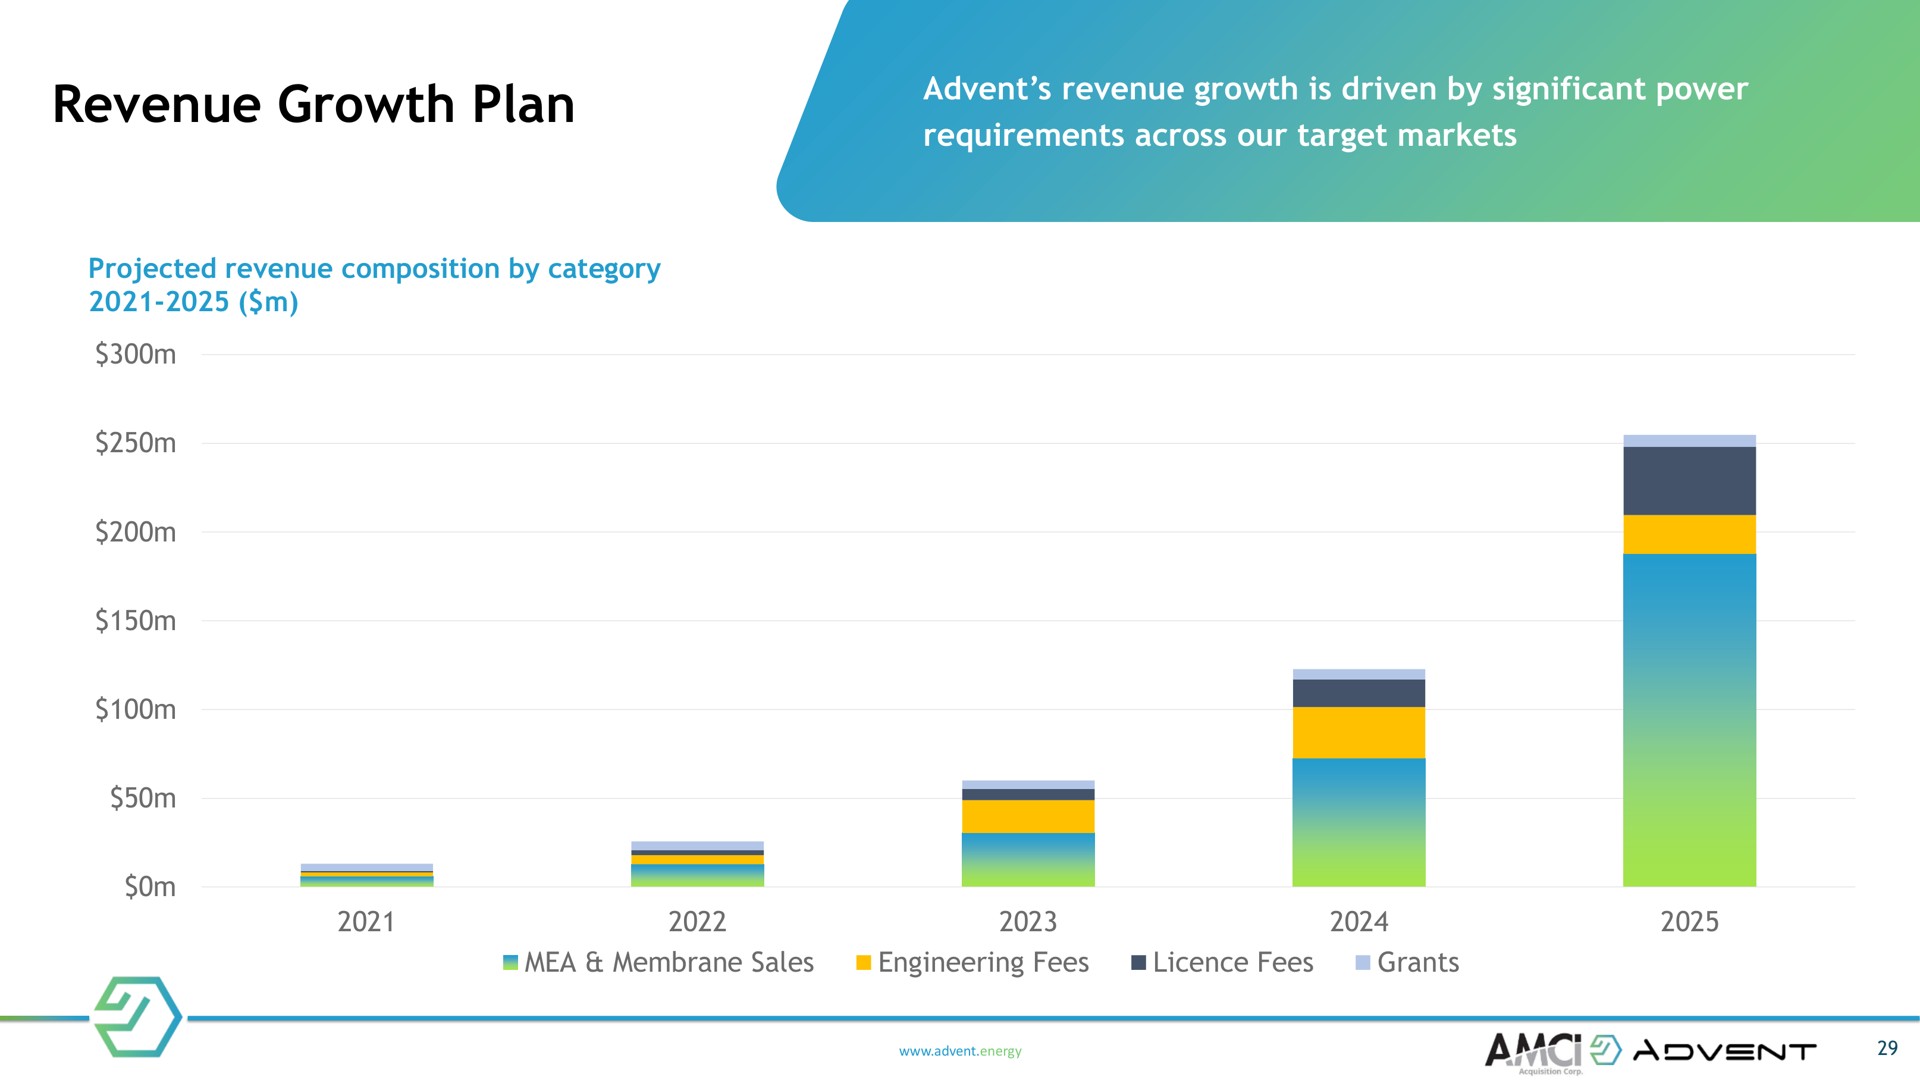 revenue growth plan is driven by significant power requirements across our target markets projected composition by category membrane sales engineering fees fees grants energy a a | Advent